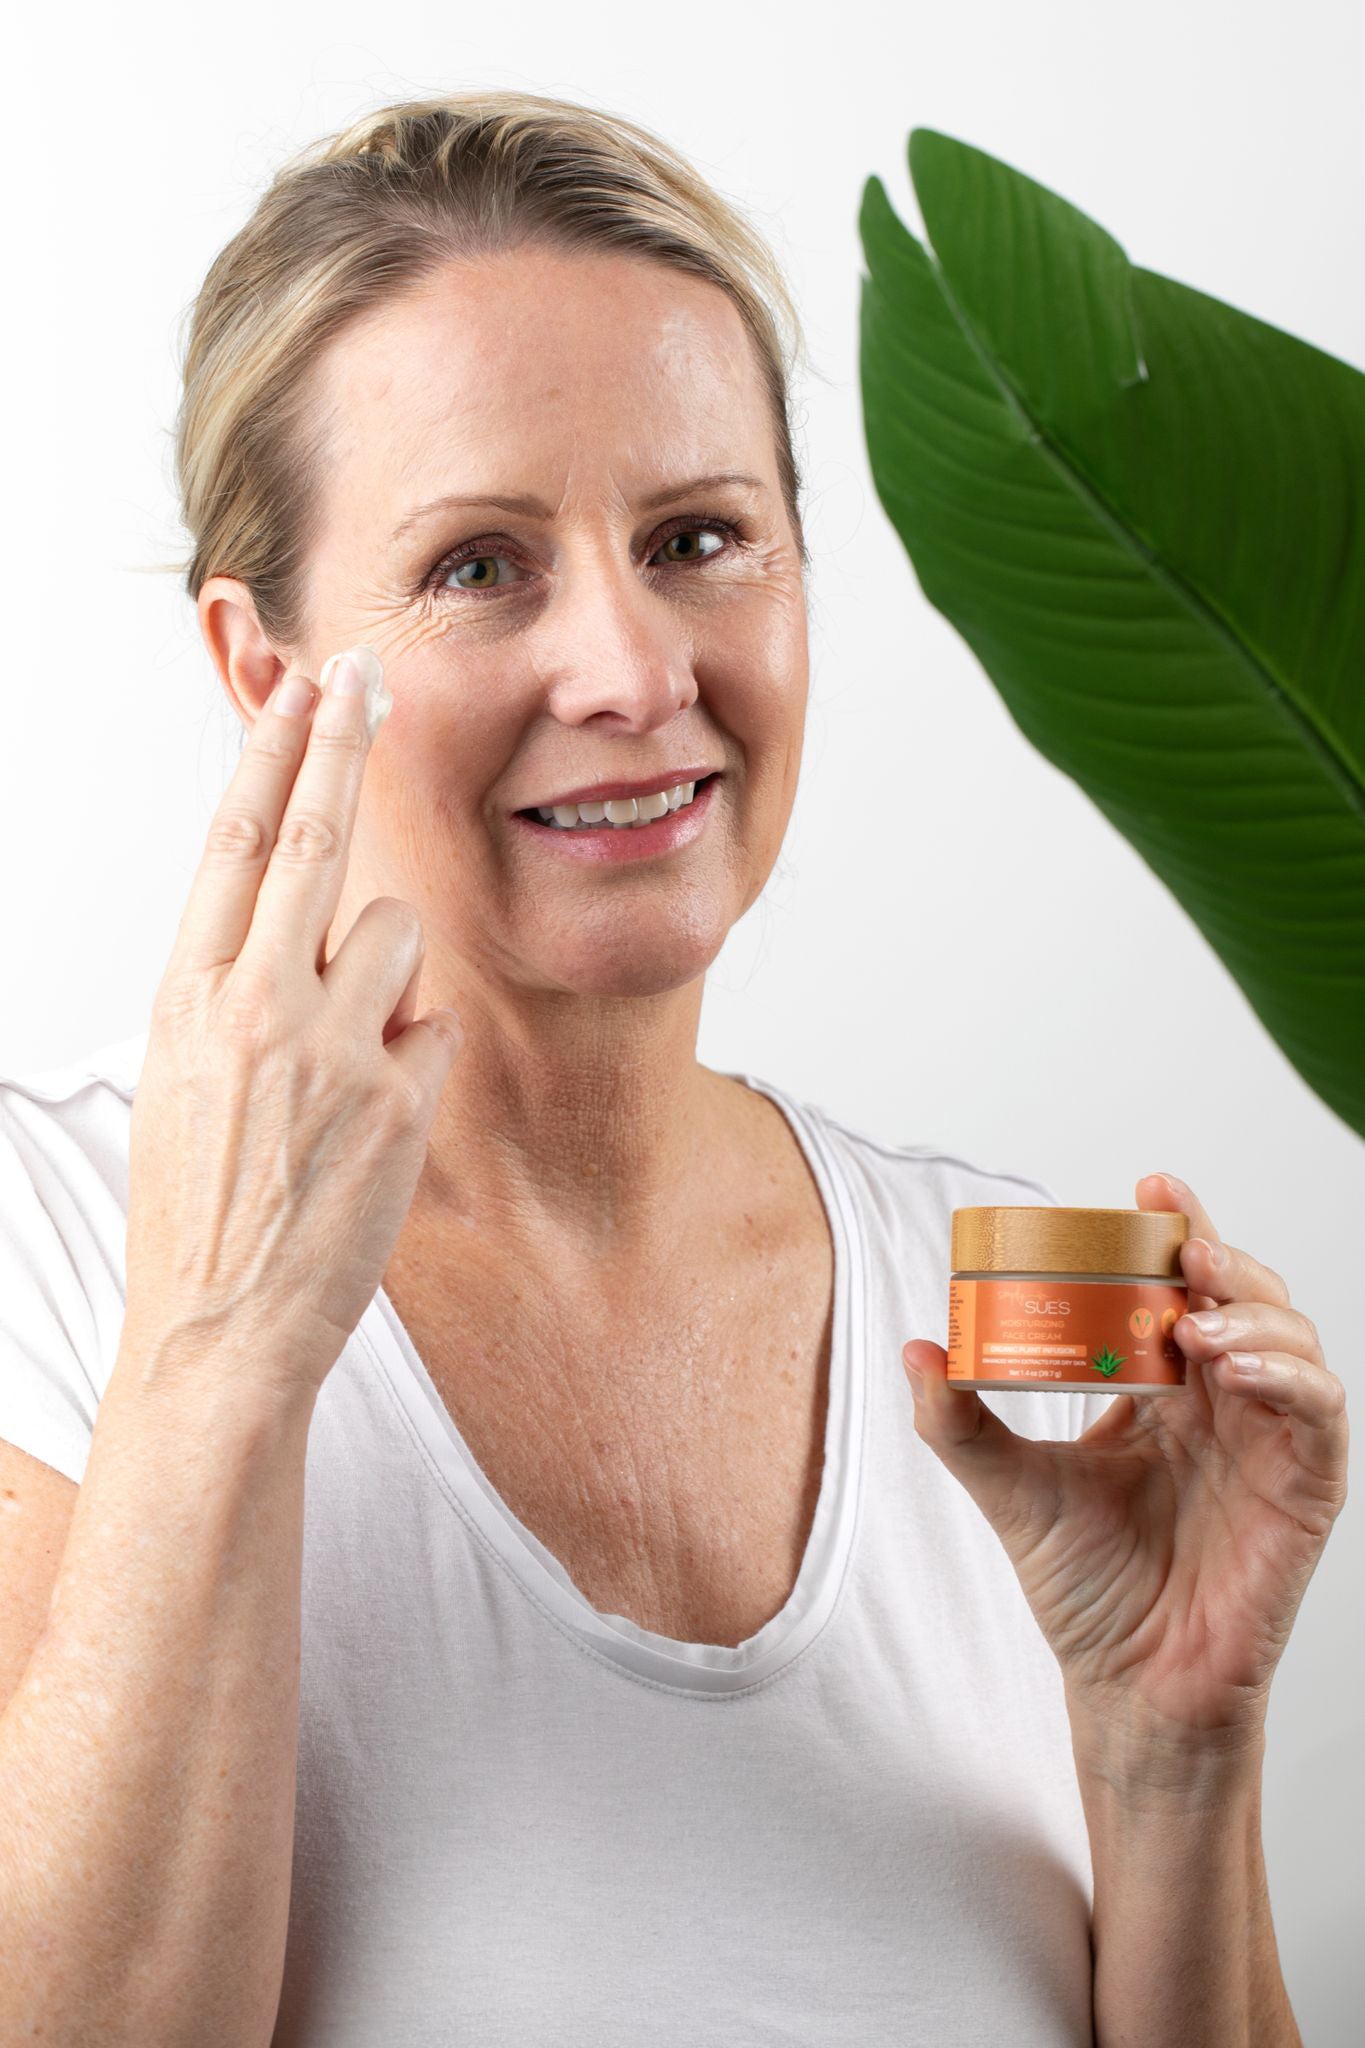 Woman holding jar of Moisturizing Face Cream and apply a small amount of cream to her face.